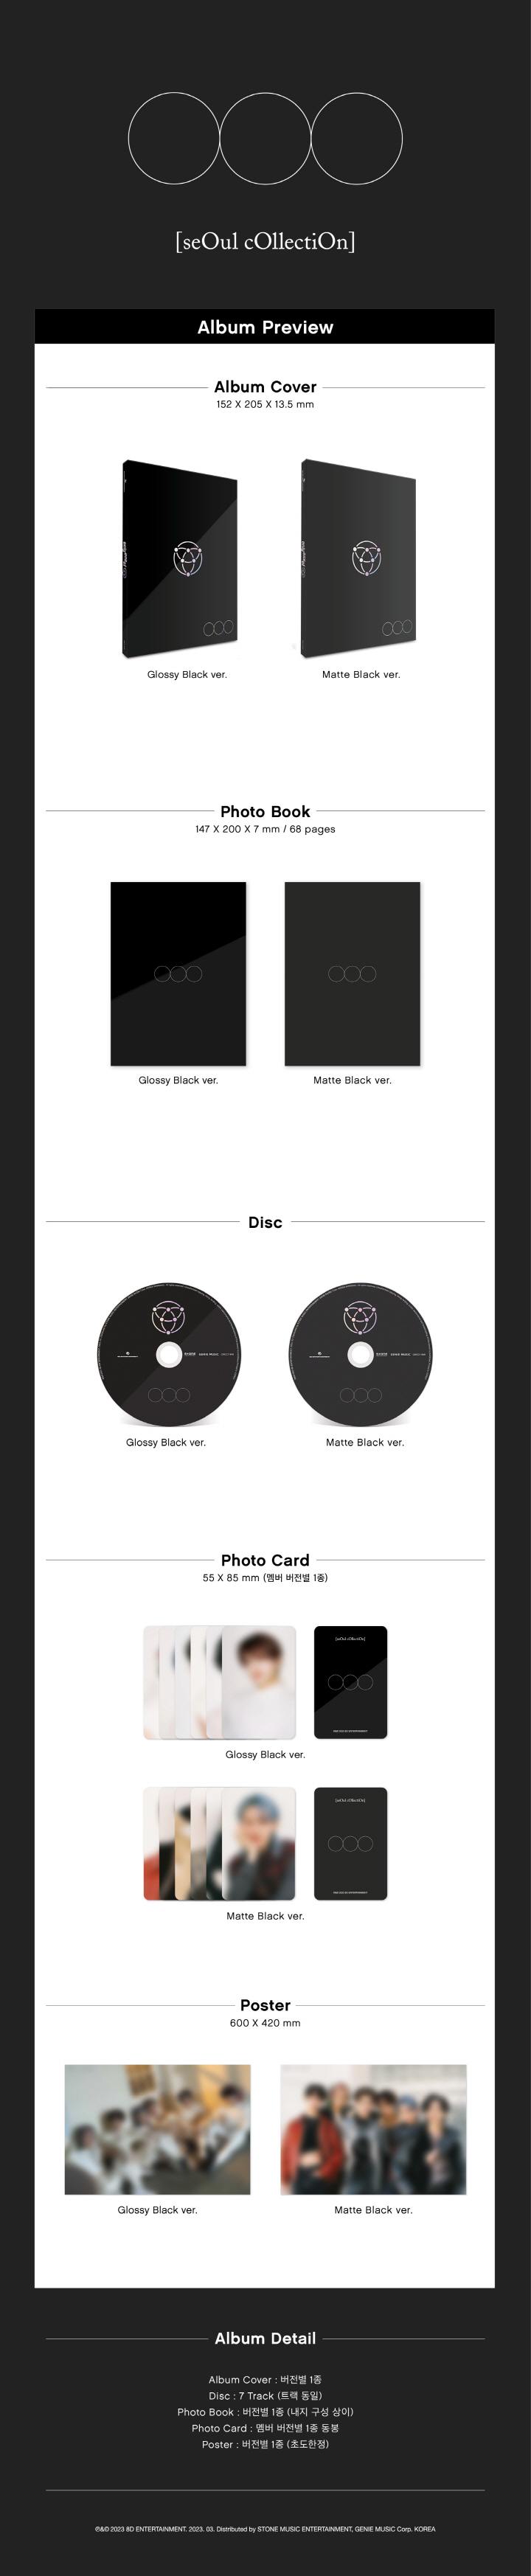 OnlyOneOf  seOul cOllectiOn Glossy Black ver